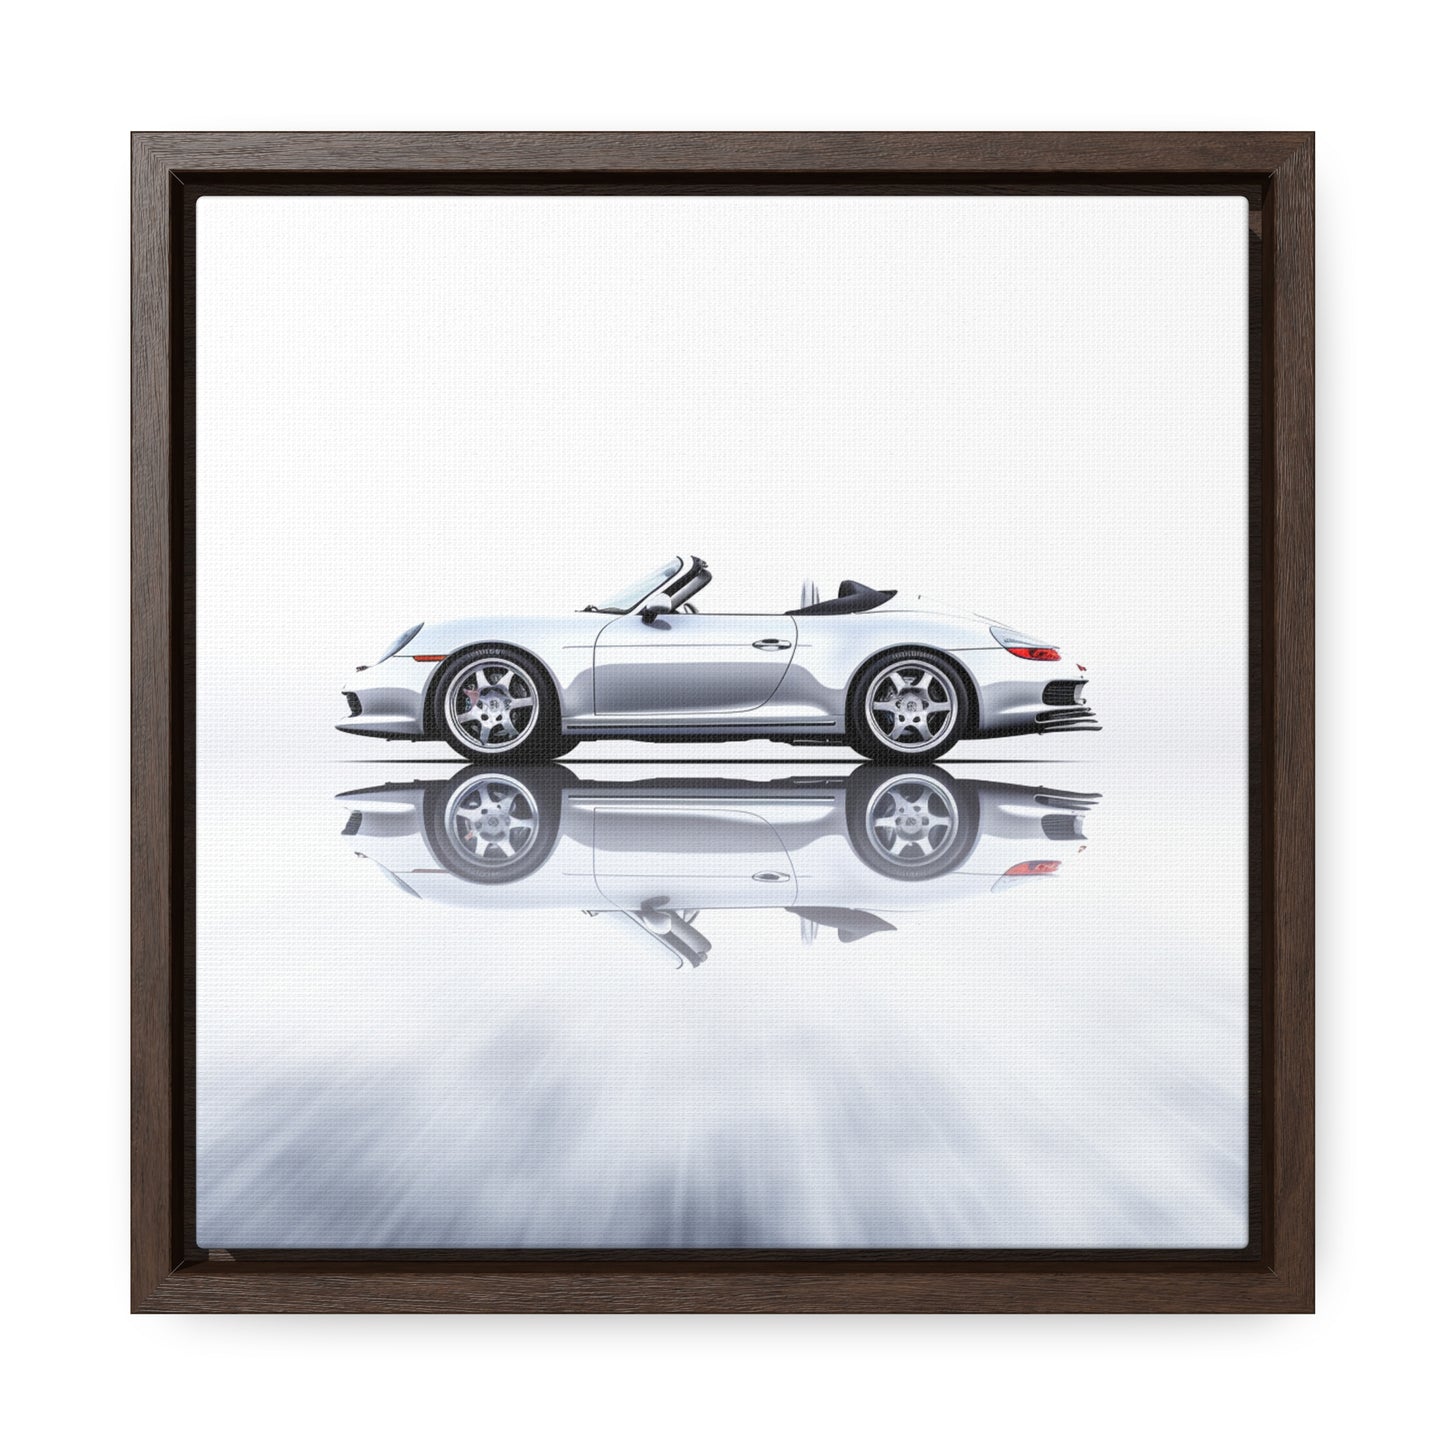 Gallery Canvas Wraps, Square Frame 911 Speedster on water 3